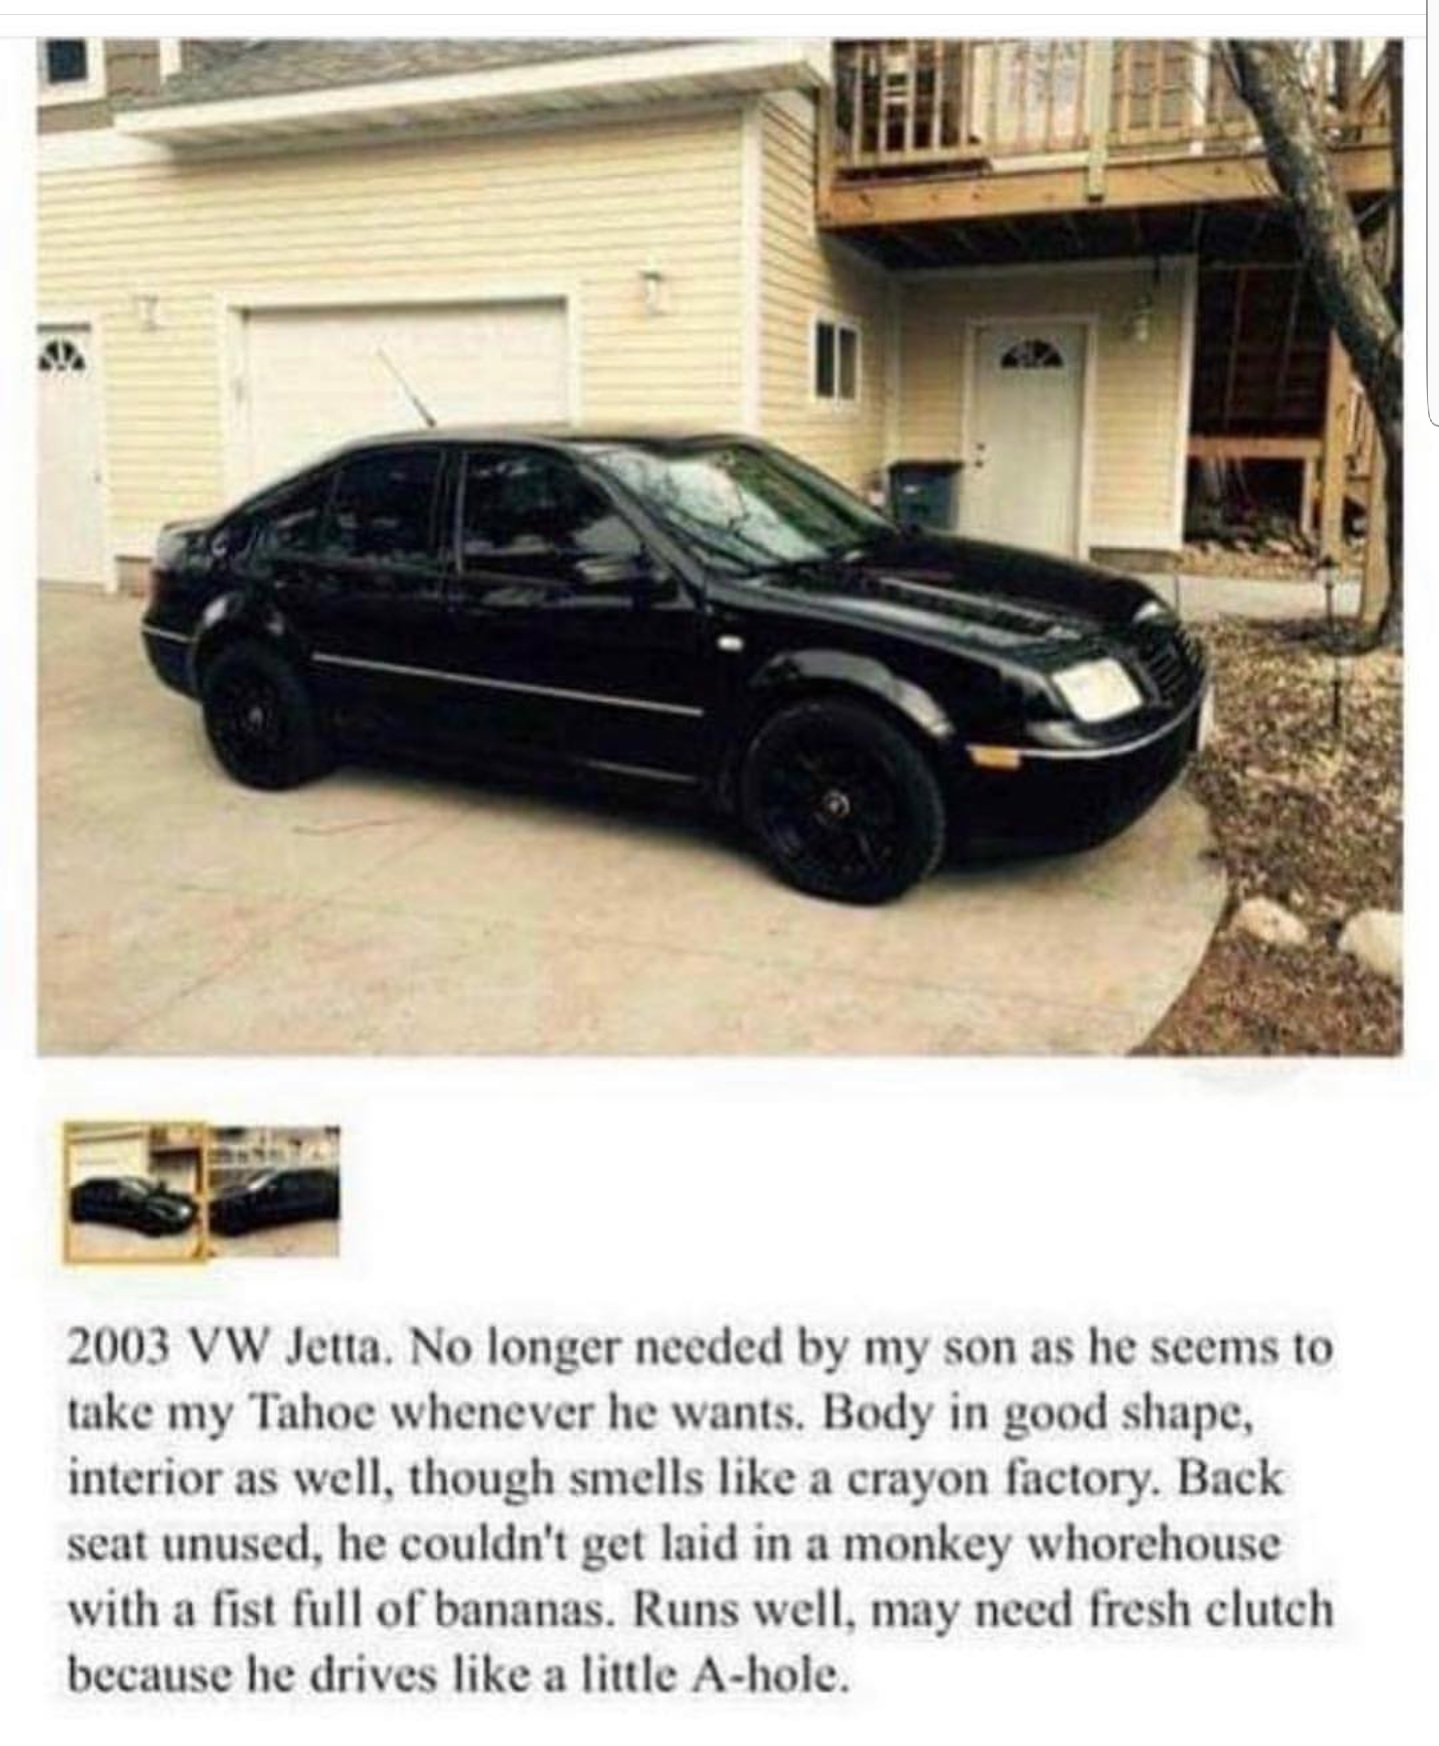 craigslist ad on vw jetta memes - 2003 Vw Jetta. No longer needed by my son as he seems to take my Tahoe whenever he wants. Body in good shape, interior as well, though smells a crayon factory. Back seat unused, he couldn't get laid in a monkey whorehouse